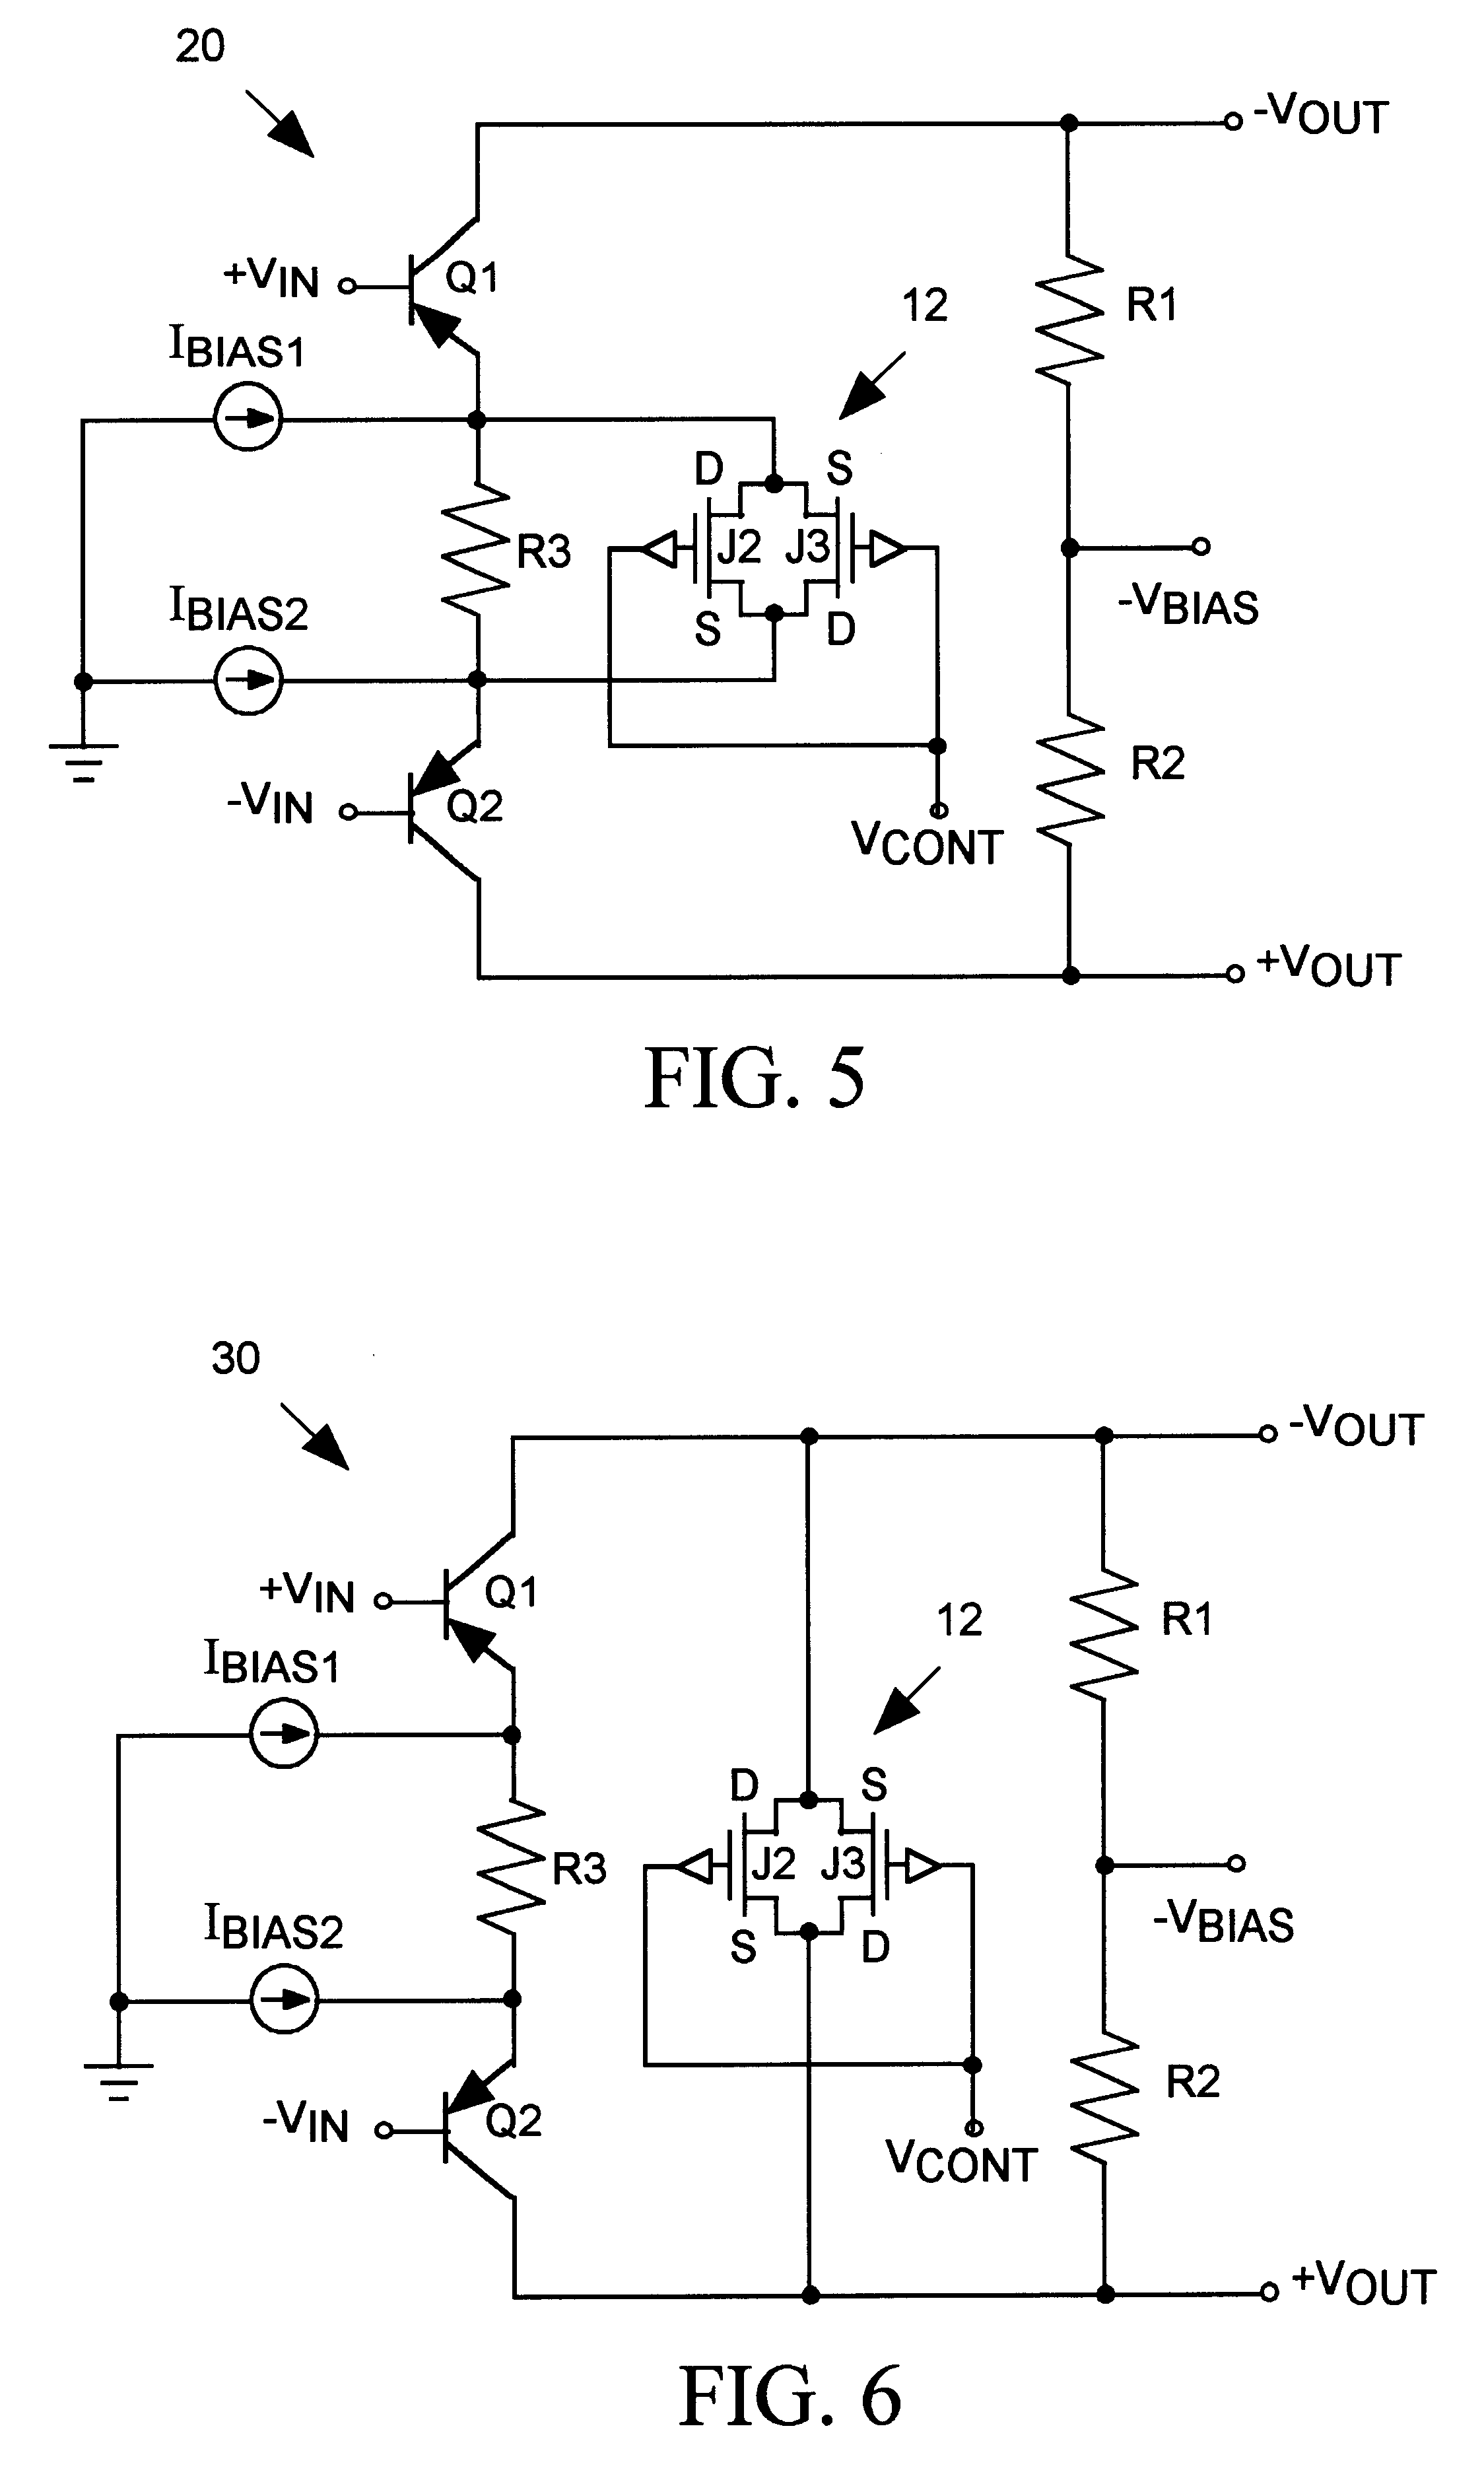 FET-based, linear voltage-controlled resistor for wide-band gain control circuit